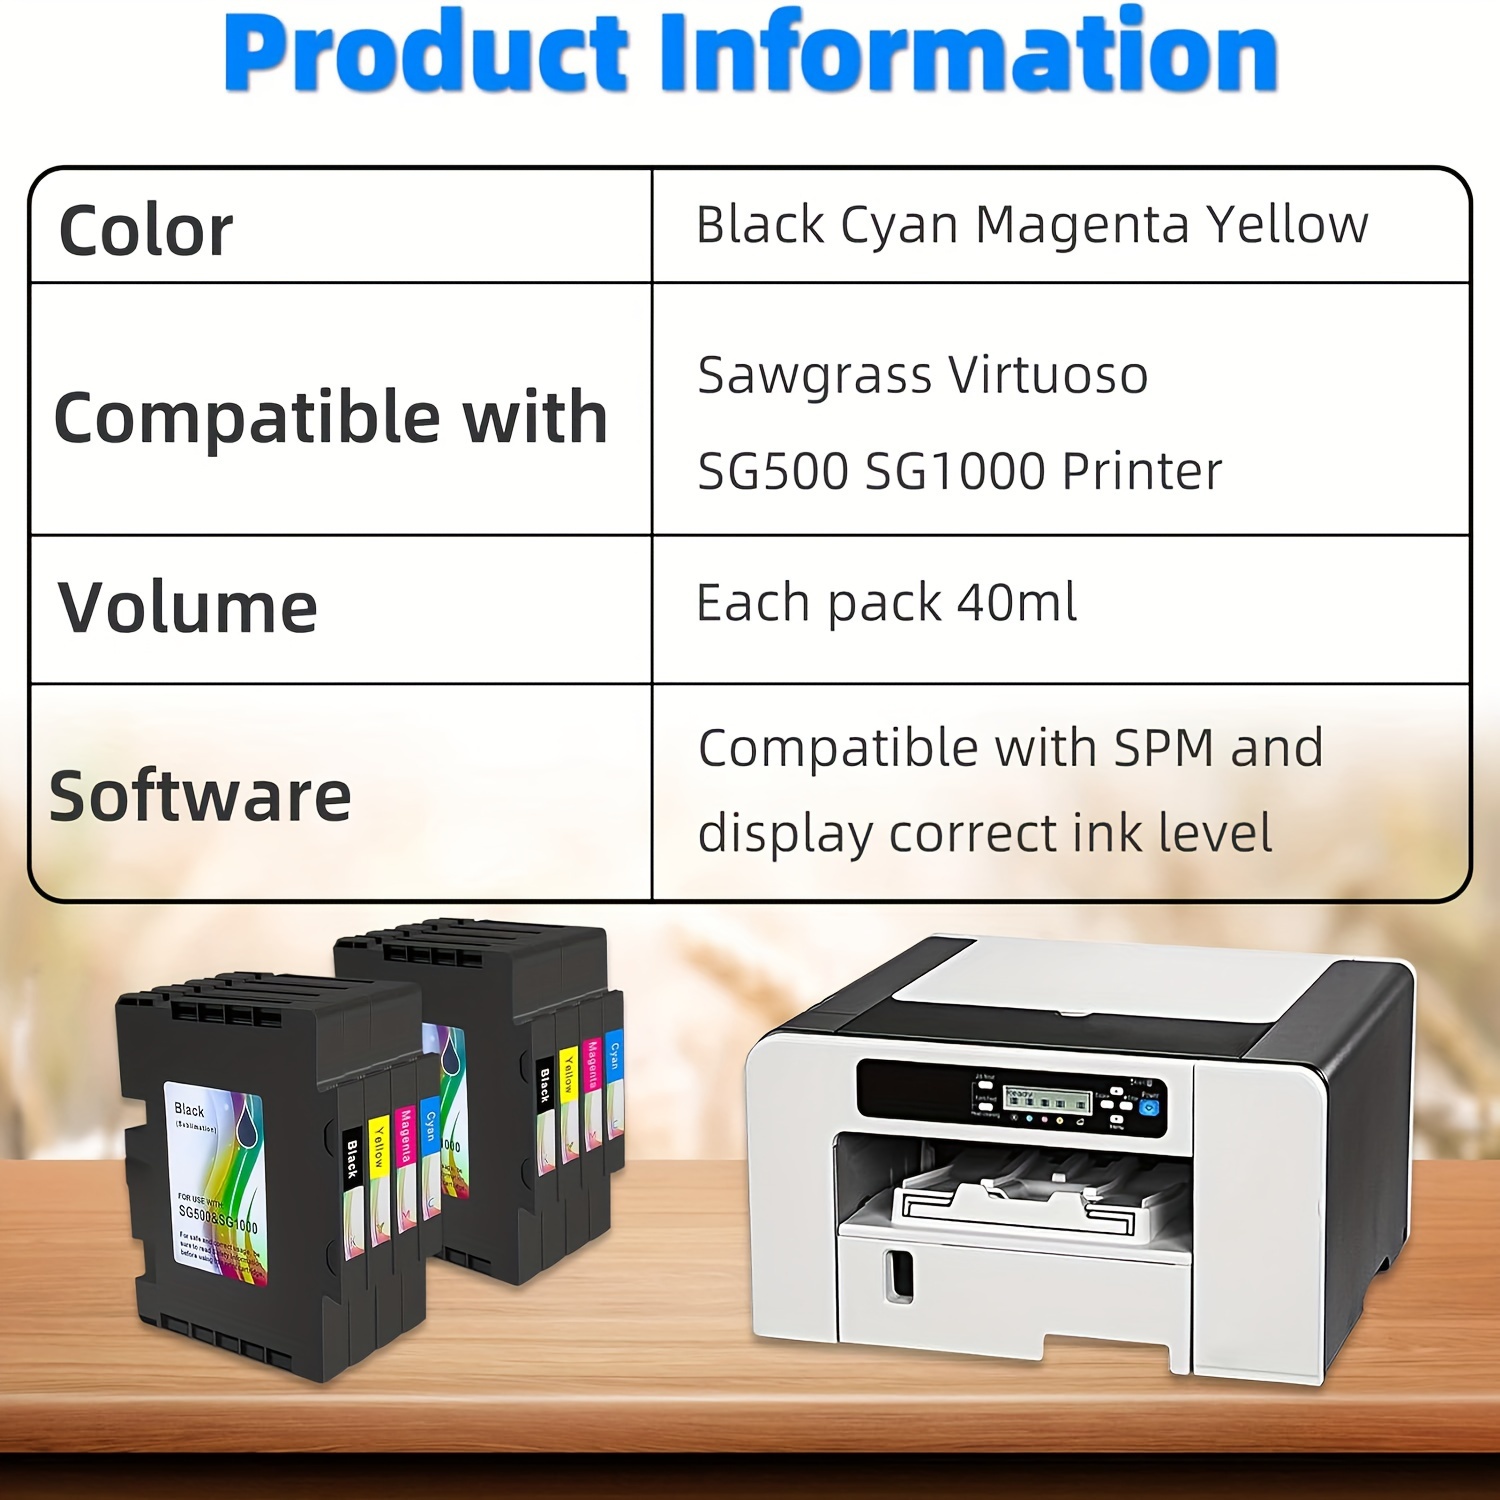 Sublimation Ink for Epson Printer, EcoTank, and Sawgrass